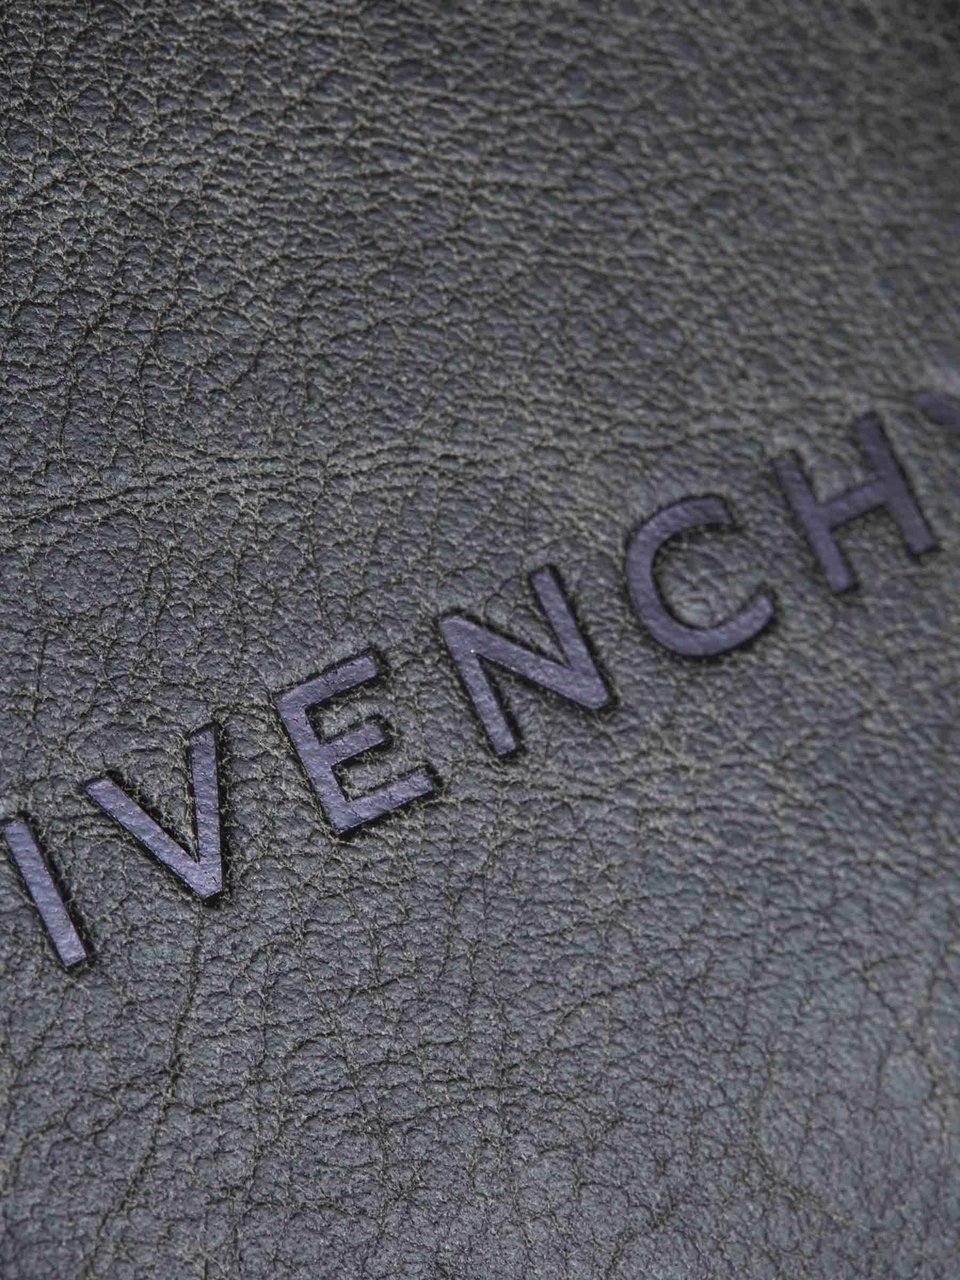 Givenchy Crackled Leather Wallet Divers